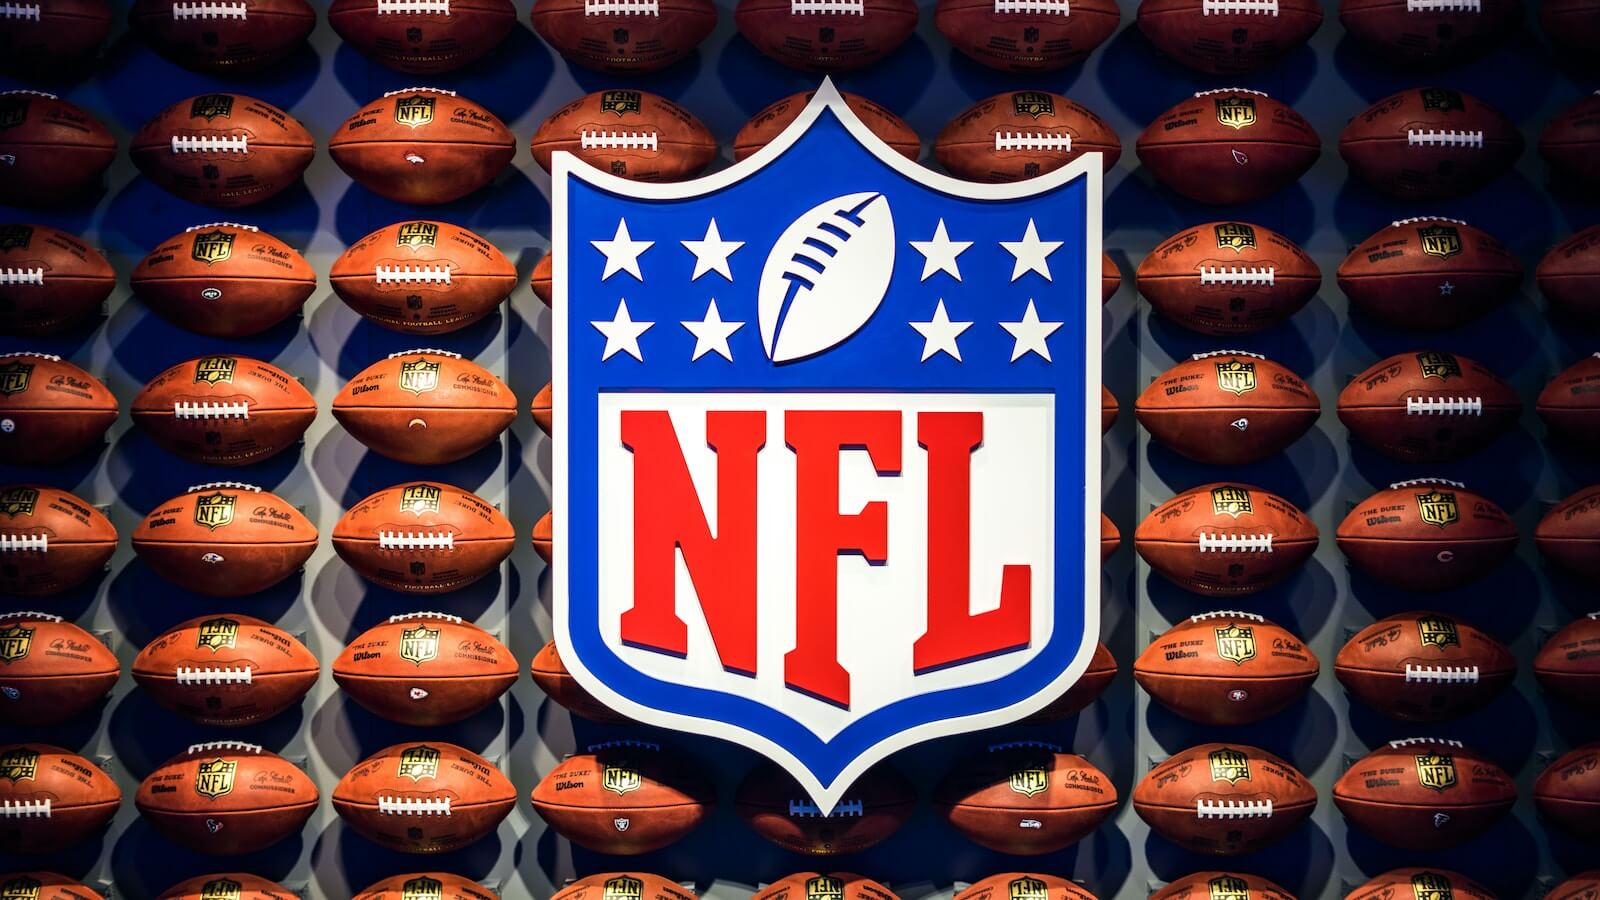 NFL logo and a wall of footballs